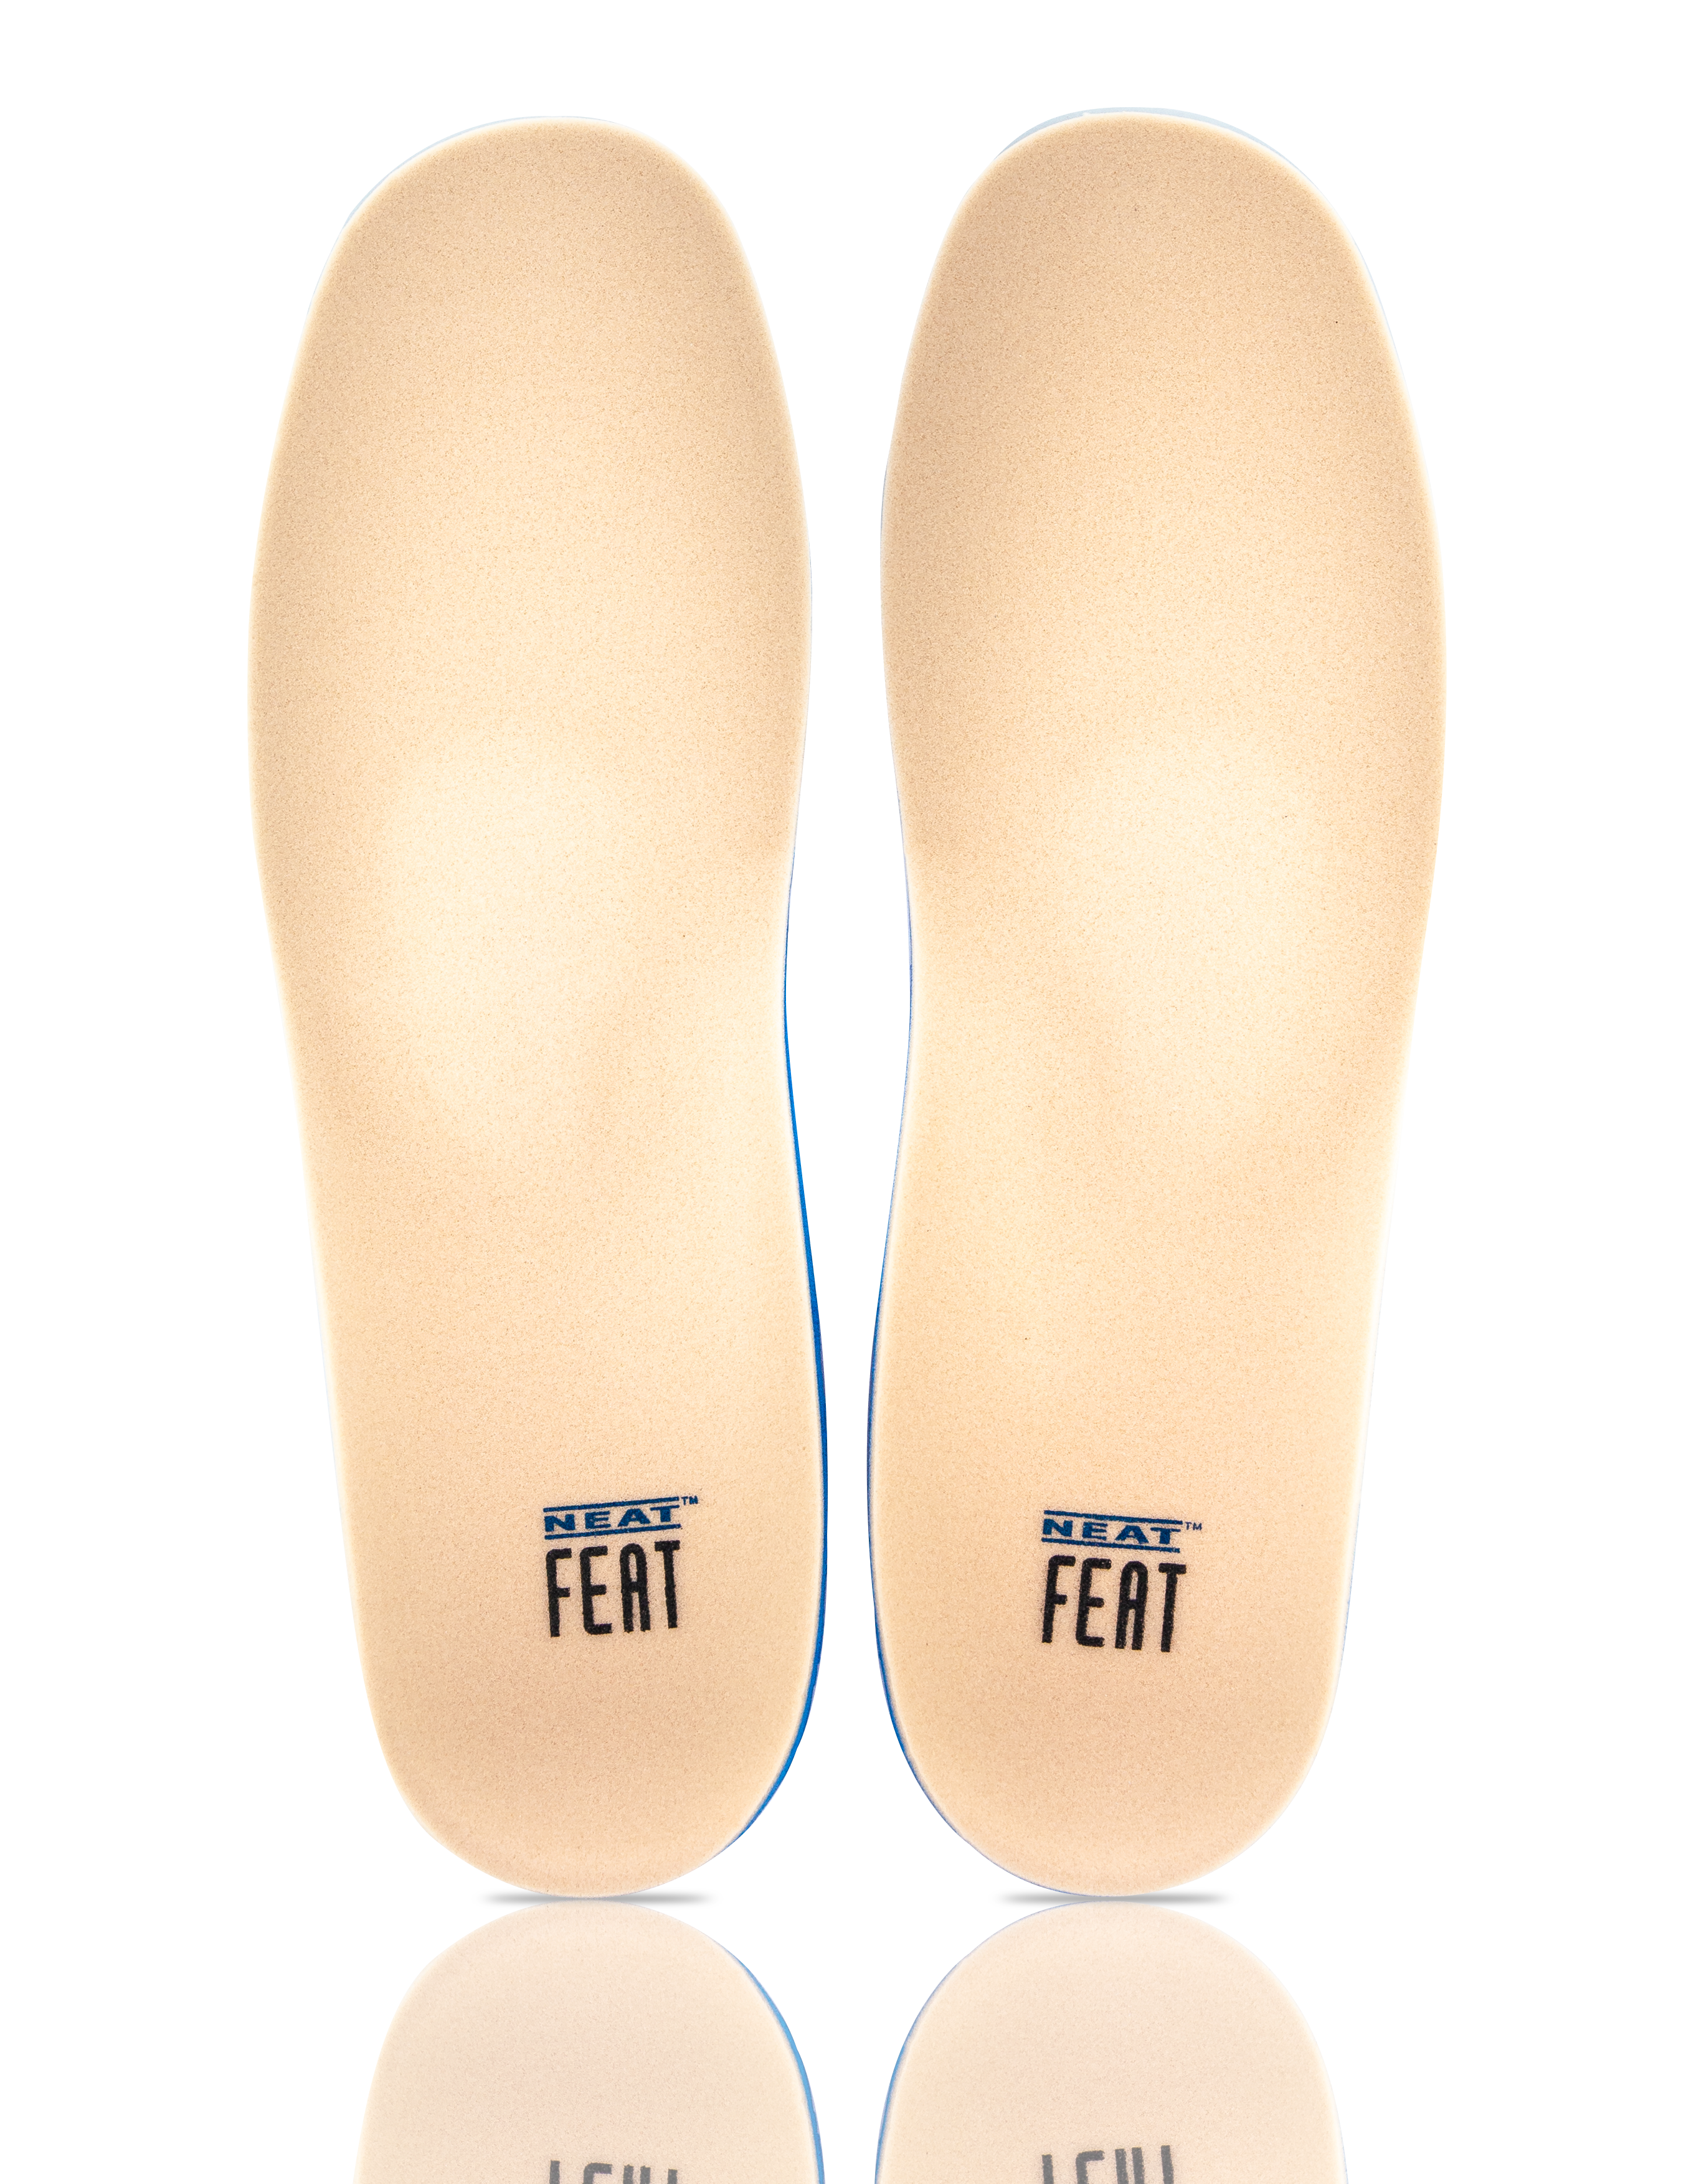 Neat Feat Orthotics Self-Moulding Insoles